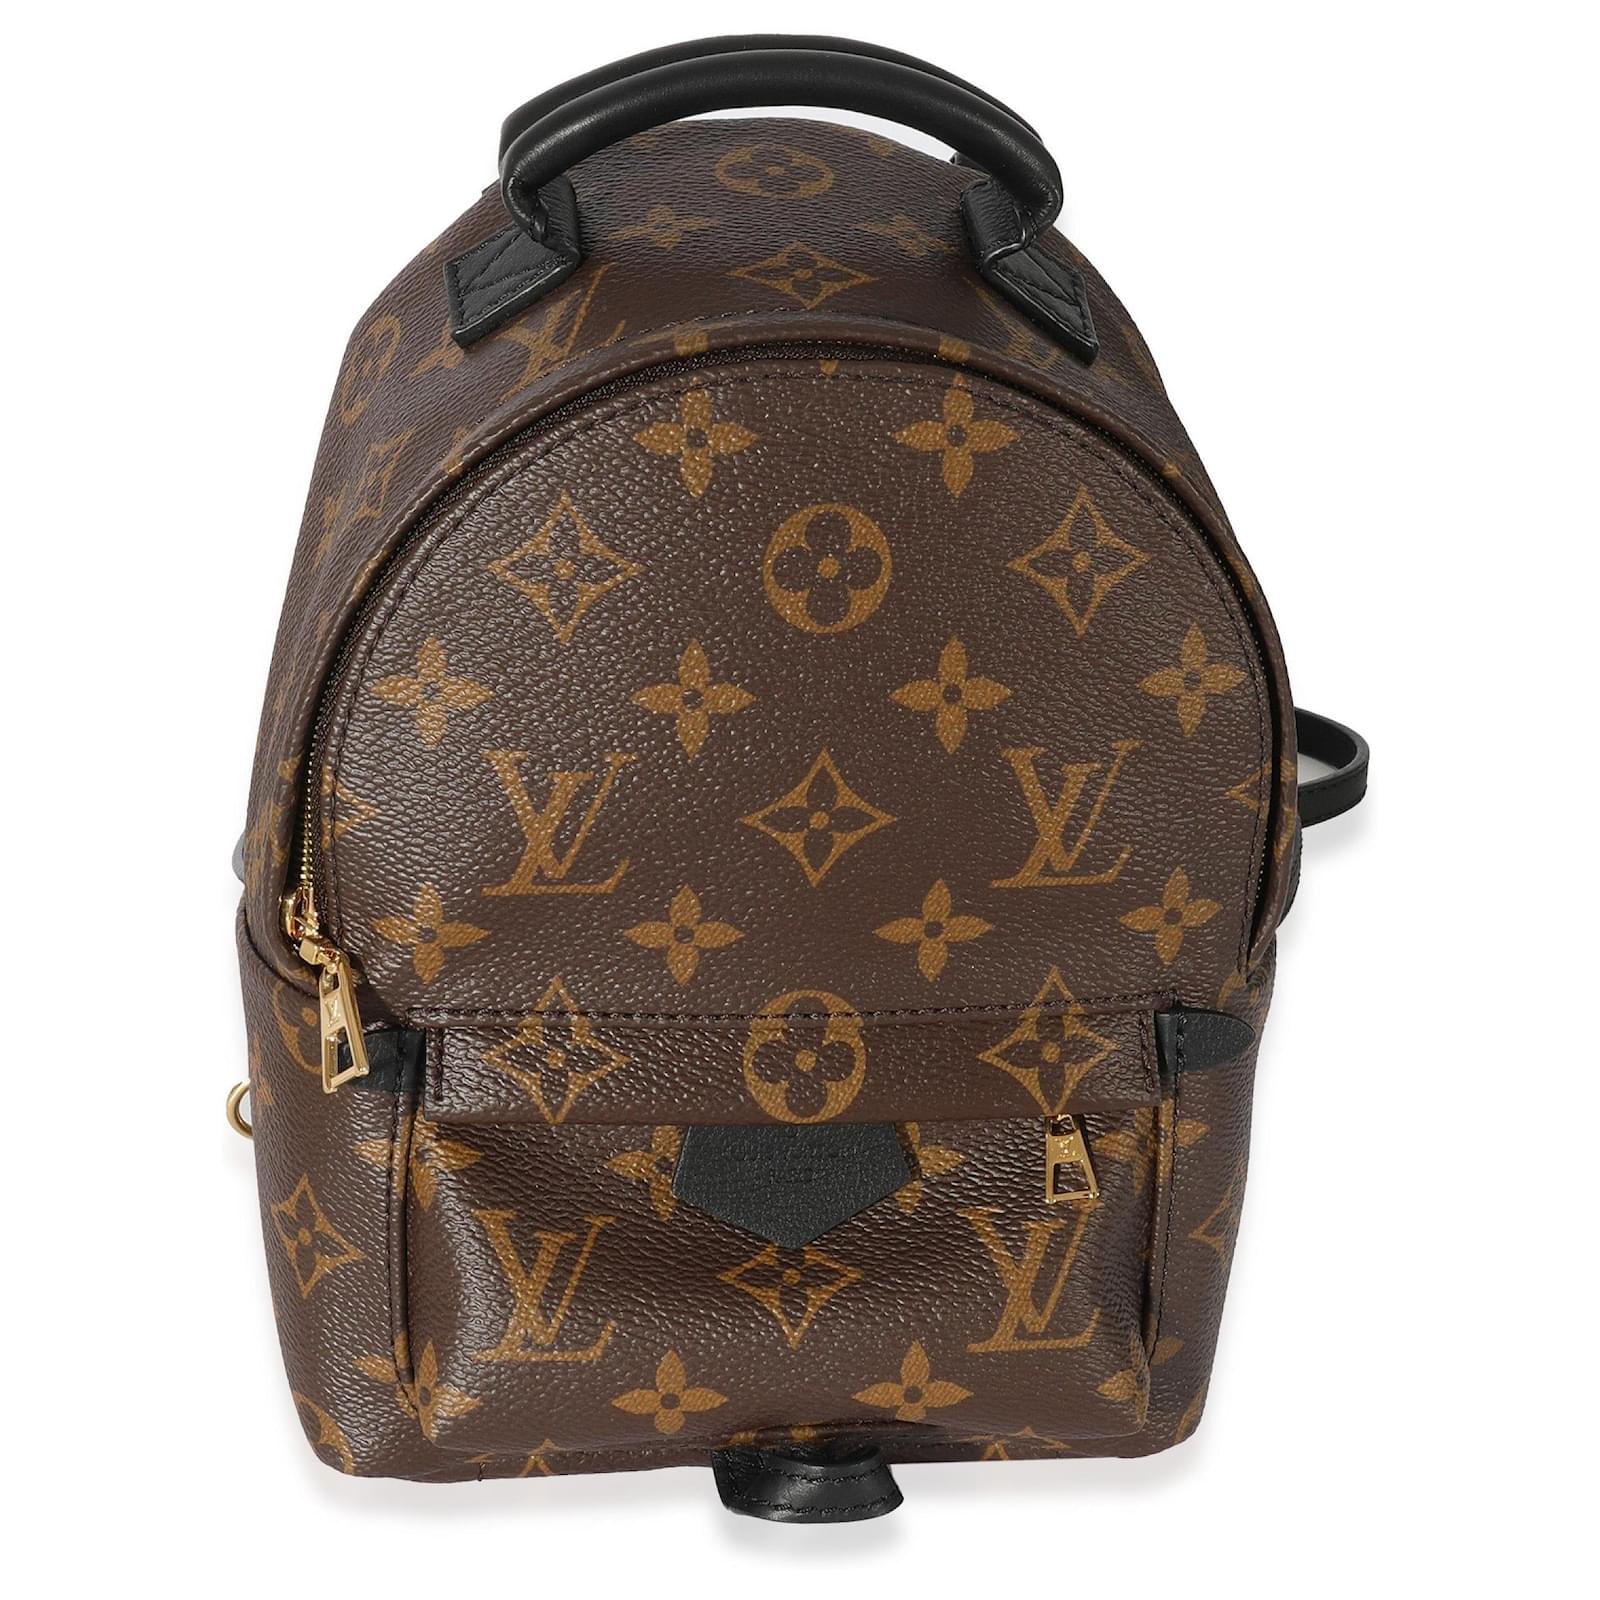 LOUIS VUITTON gift bags, small and extra-small sizes, NEW